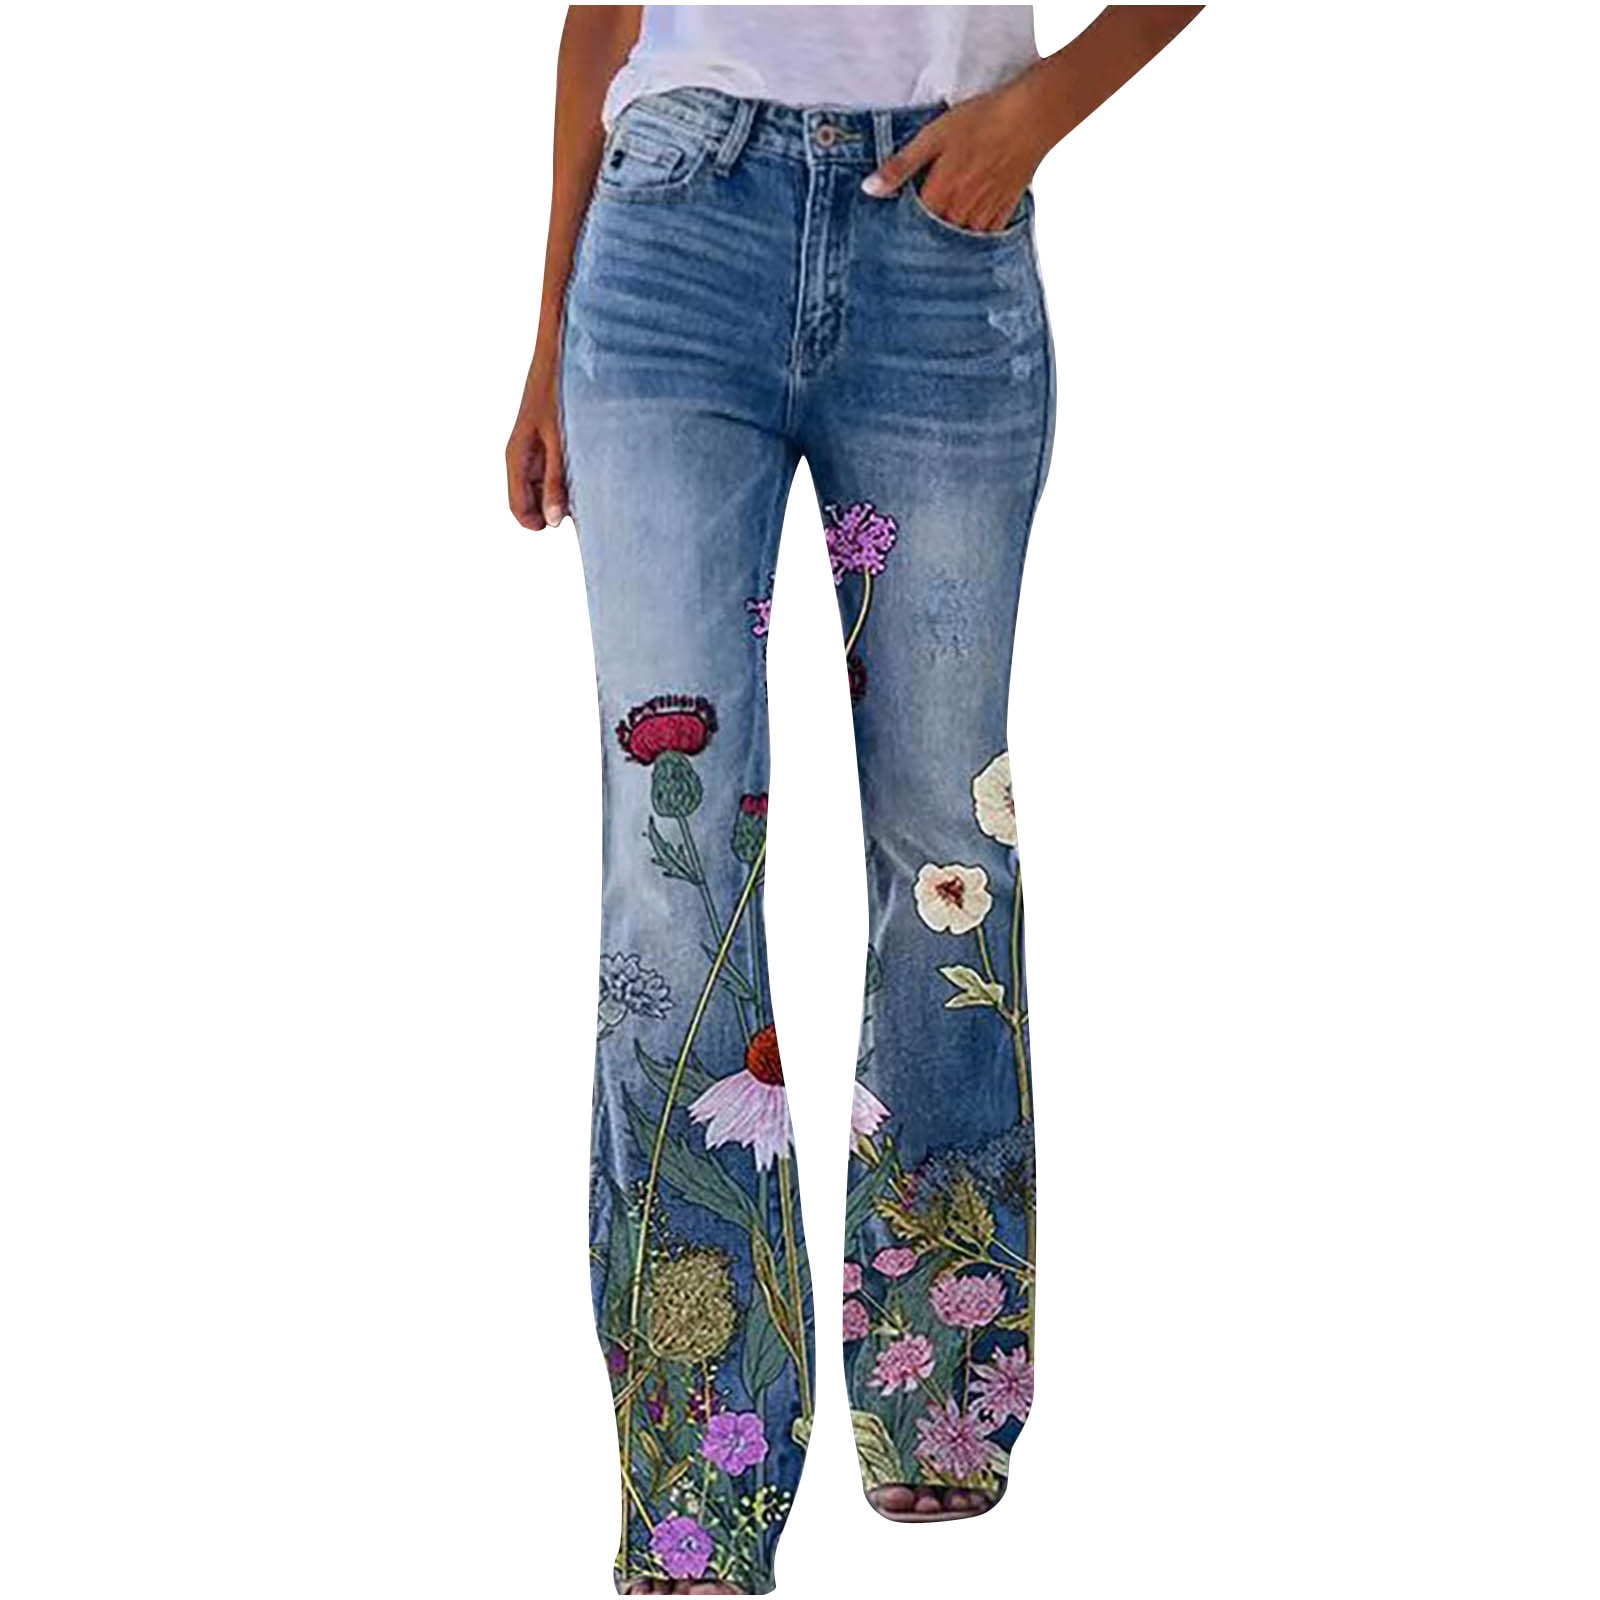 Mid Rise Jeans for Women Vintage Embroidery Floral Stretch Skinny Flare Leg  Thin Denim Pants Plus Size Pockets Jeans Bootcut Jeans for Women 